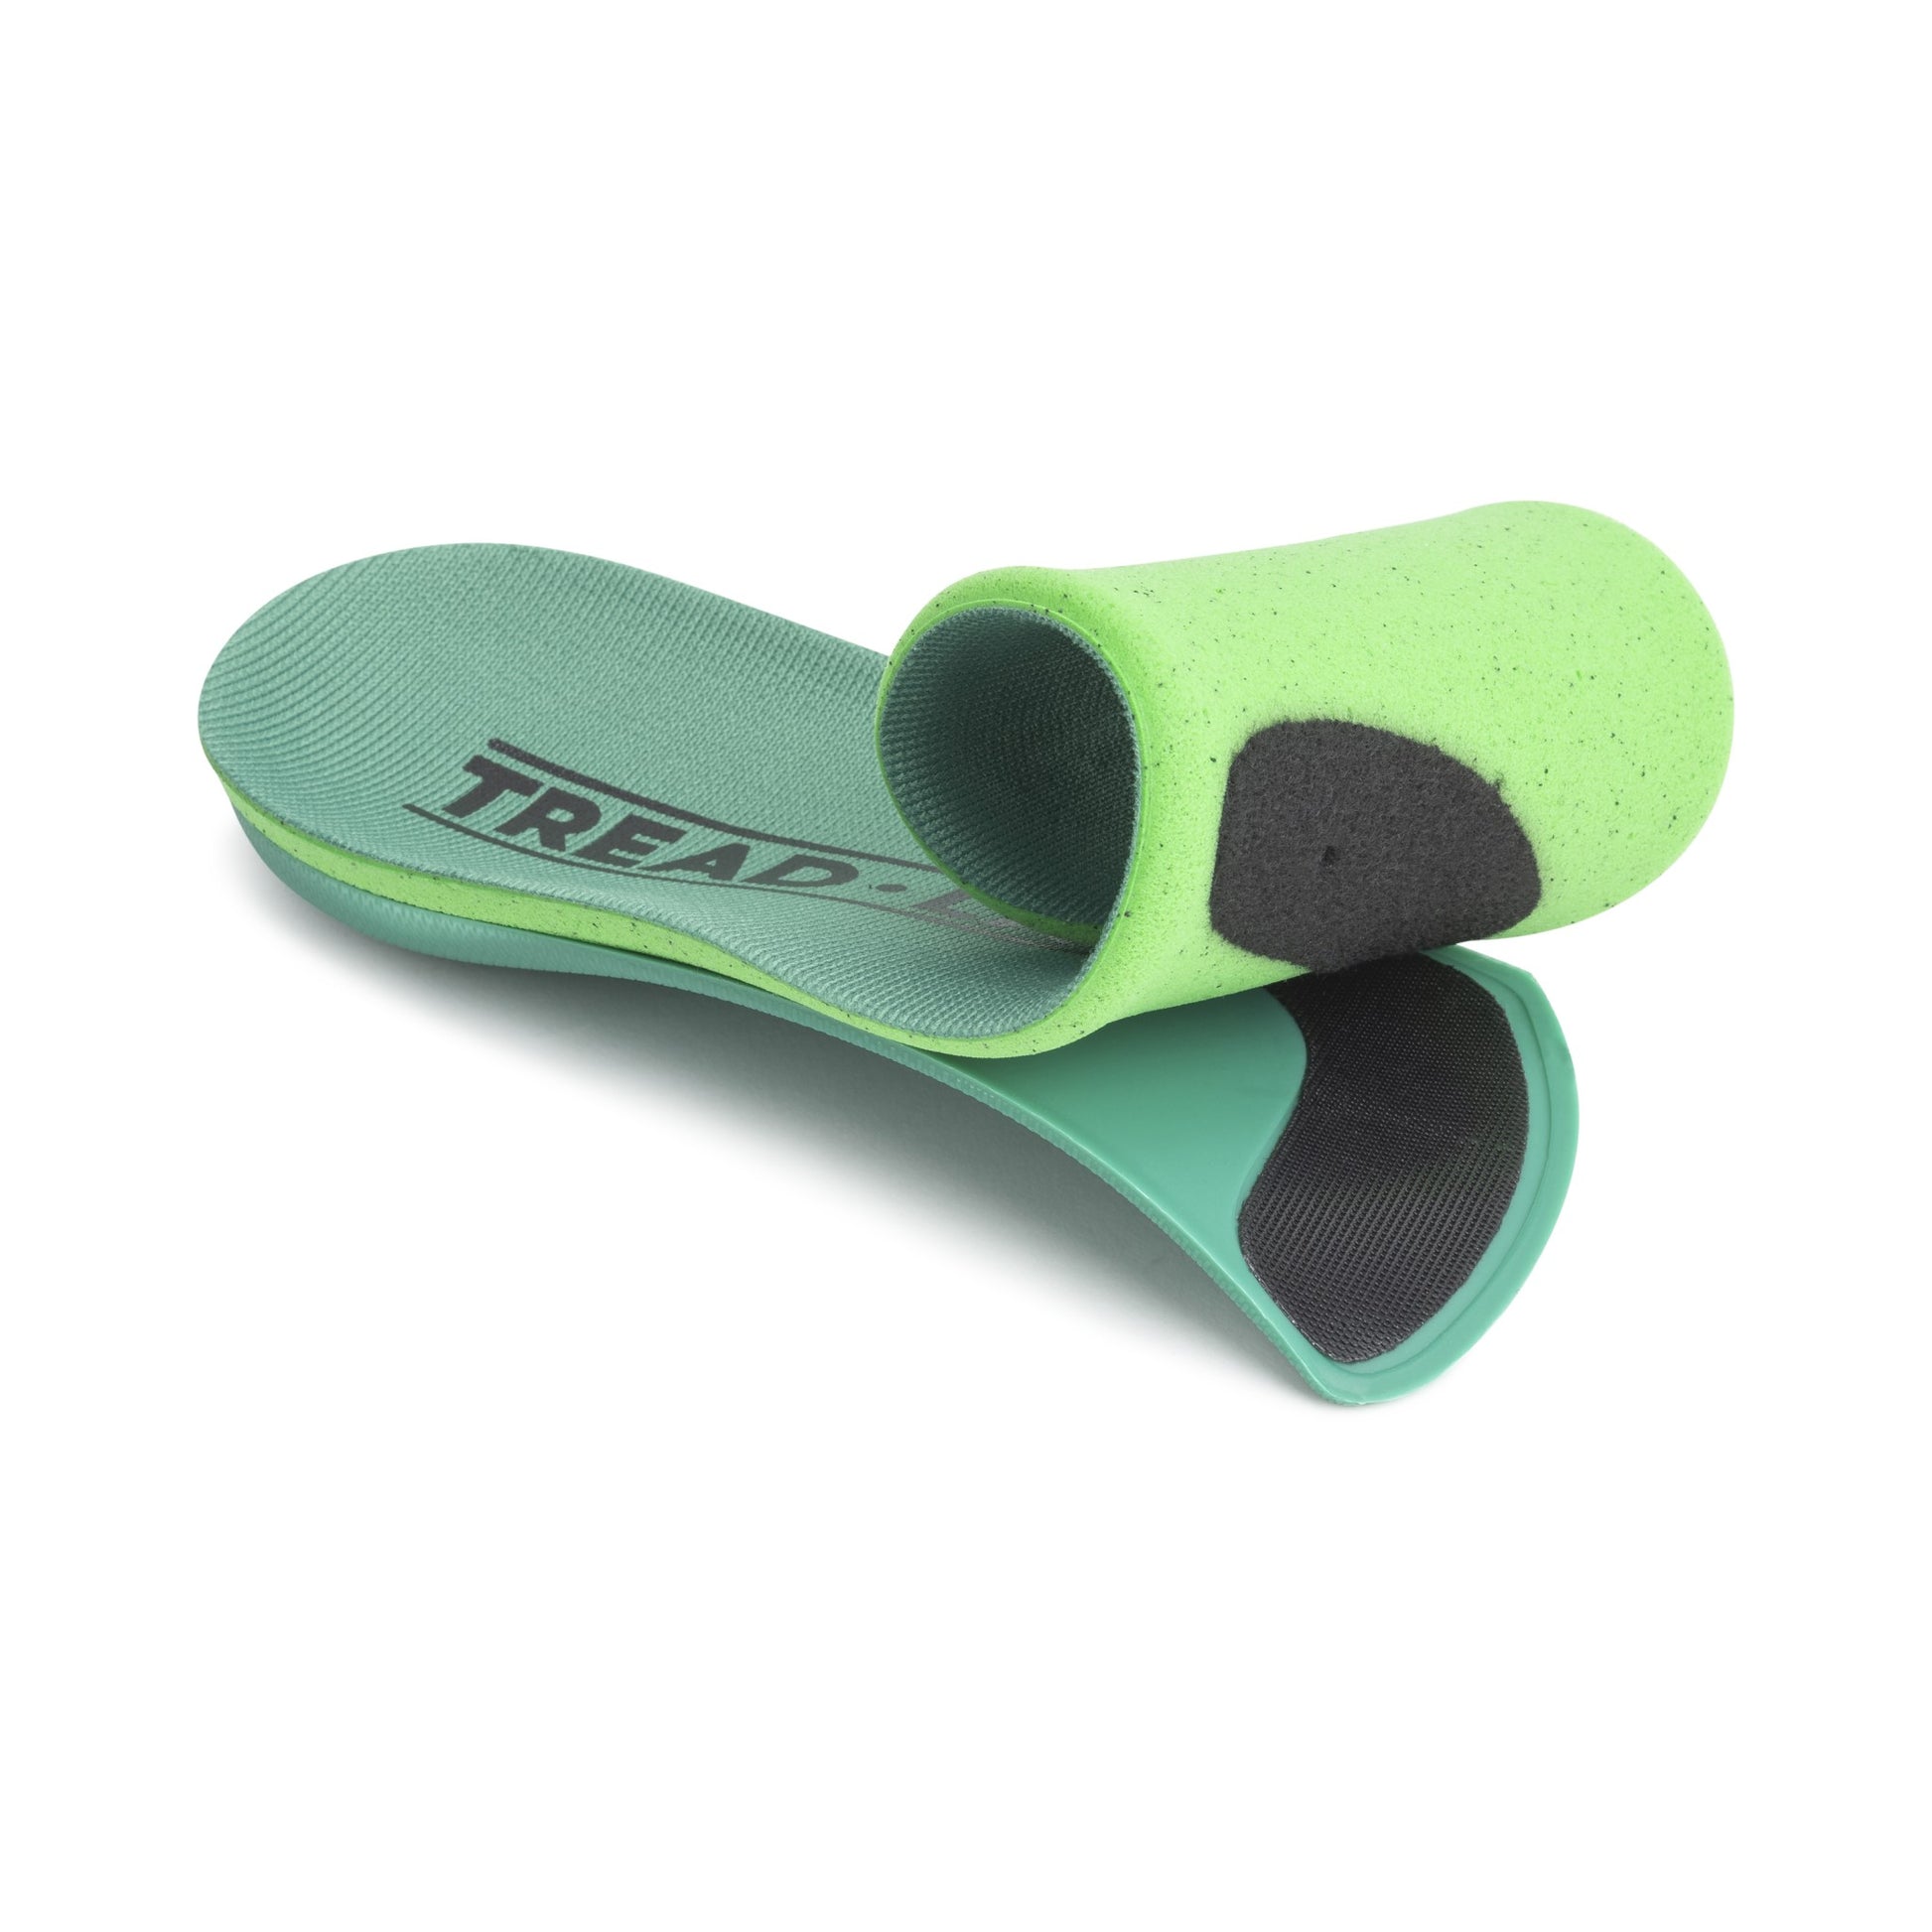 Ramble orthopedic shoe insoles with replacement top covers